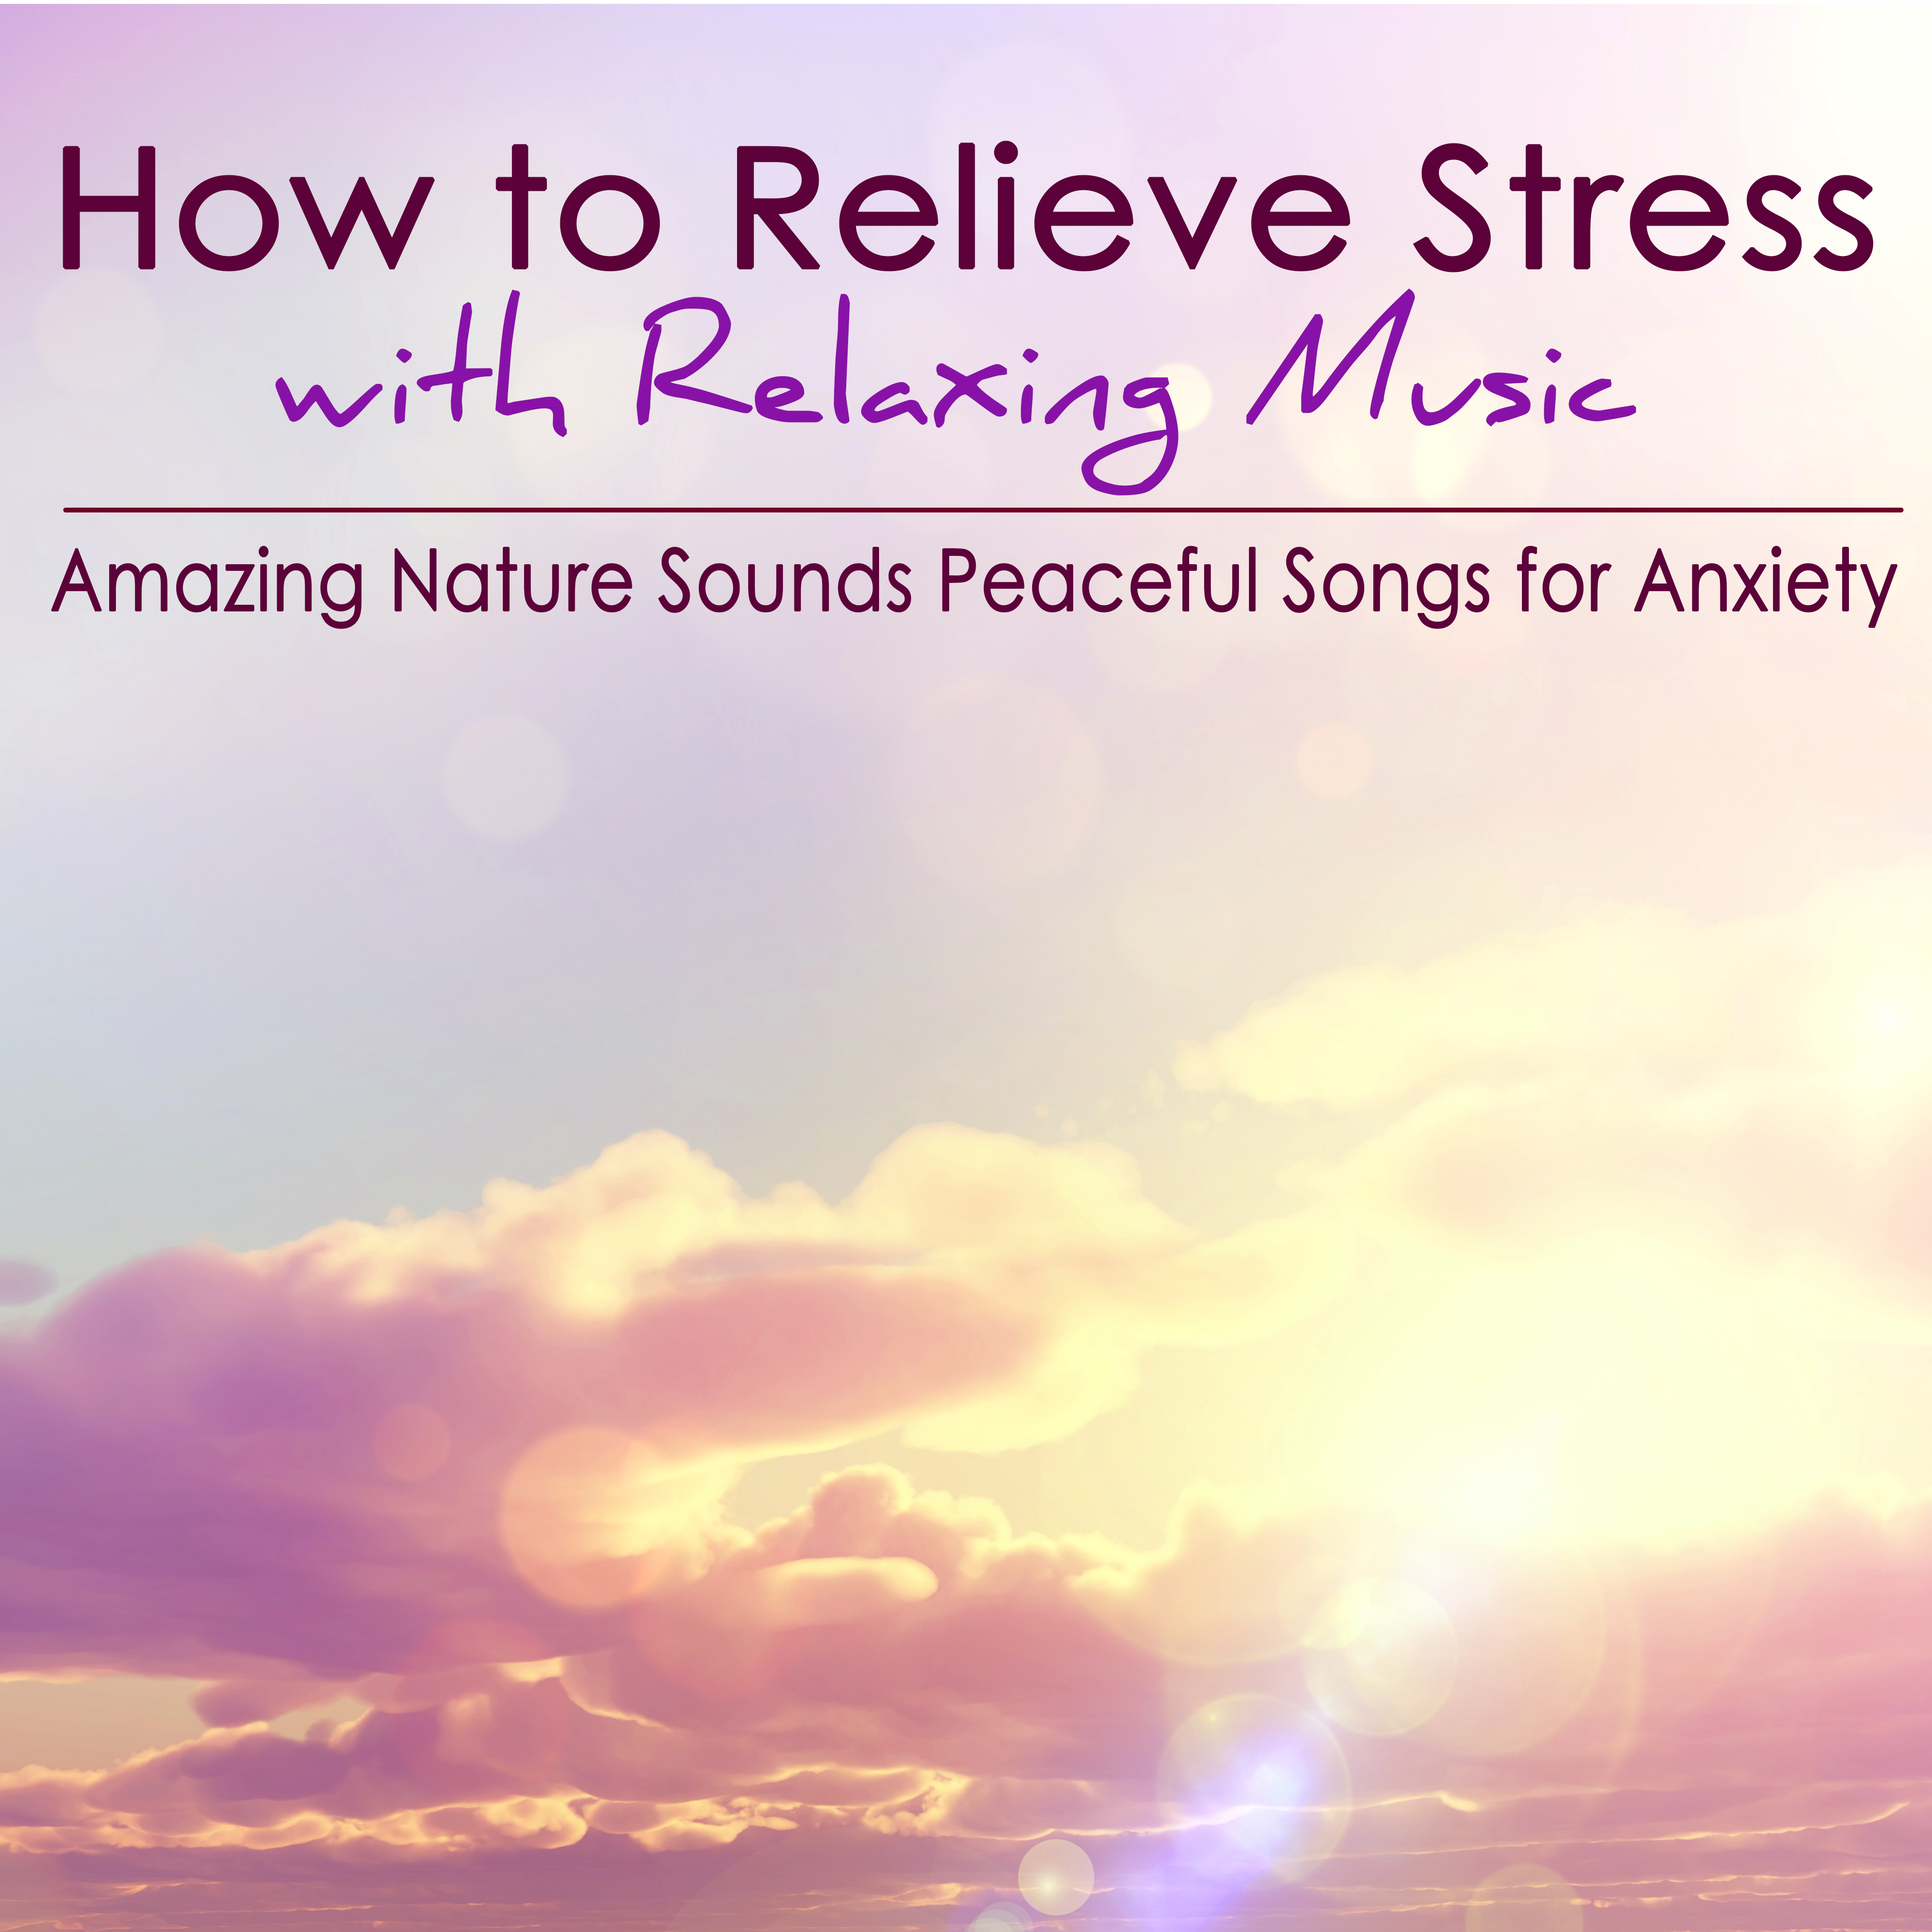 How to Relieve Stress with Relaxing Music  Amazing Nature Sounds Peaceful Songs for Anxiety